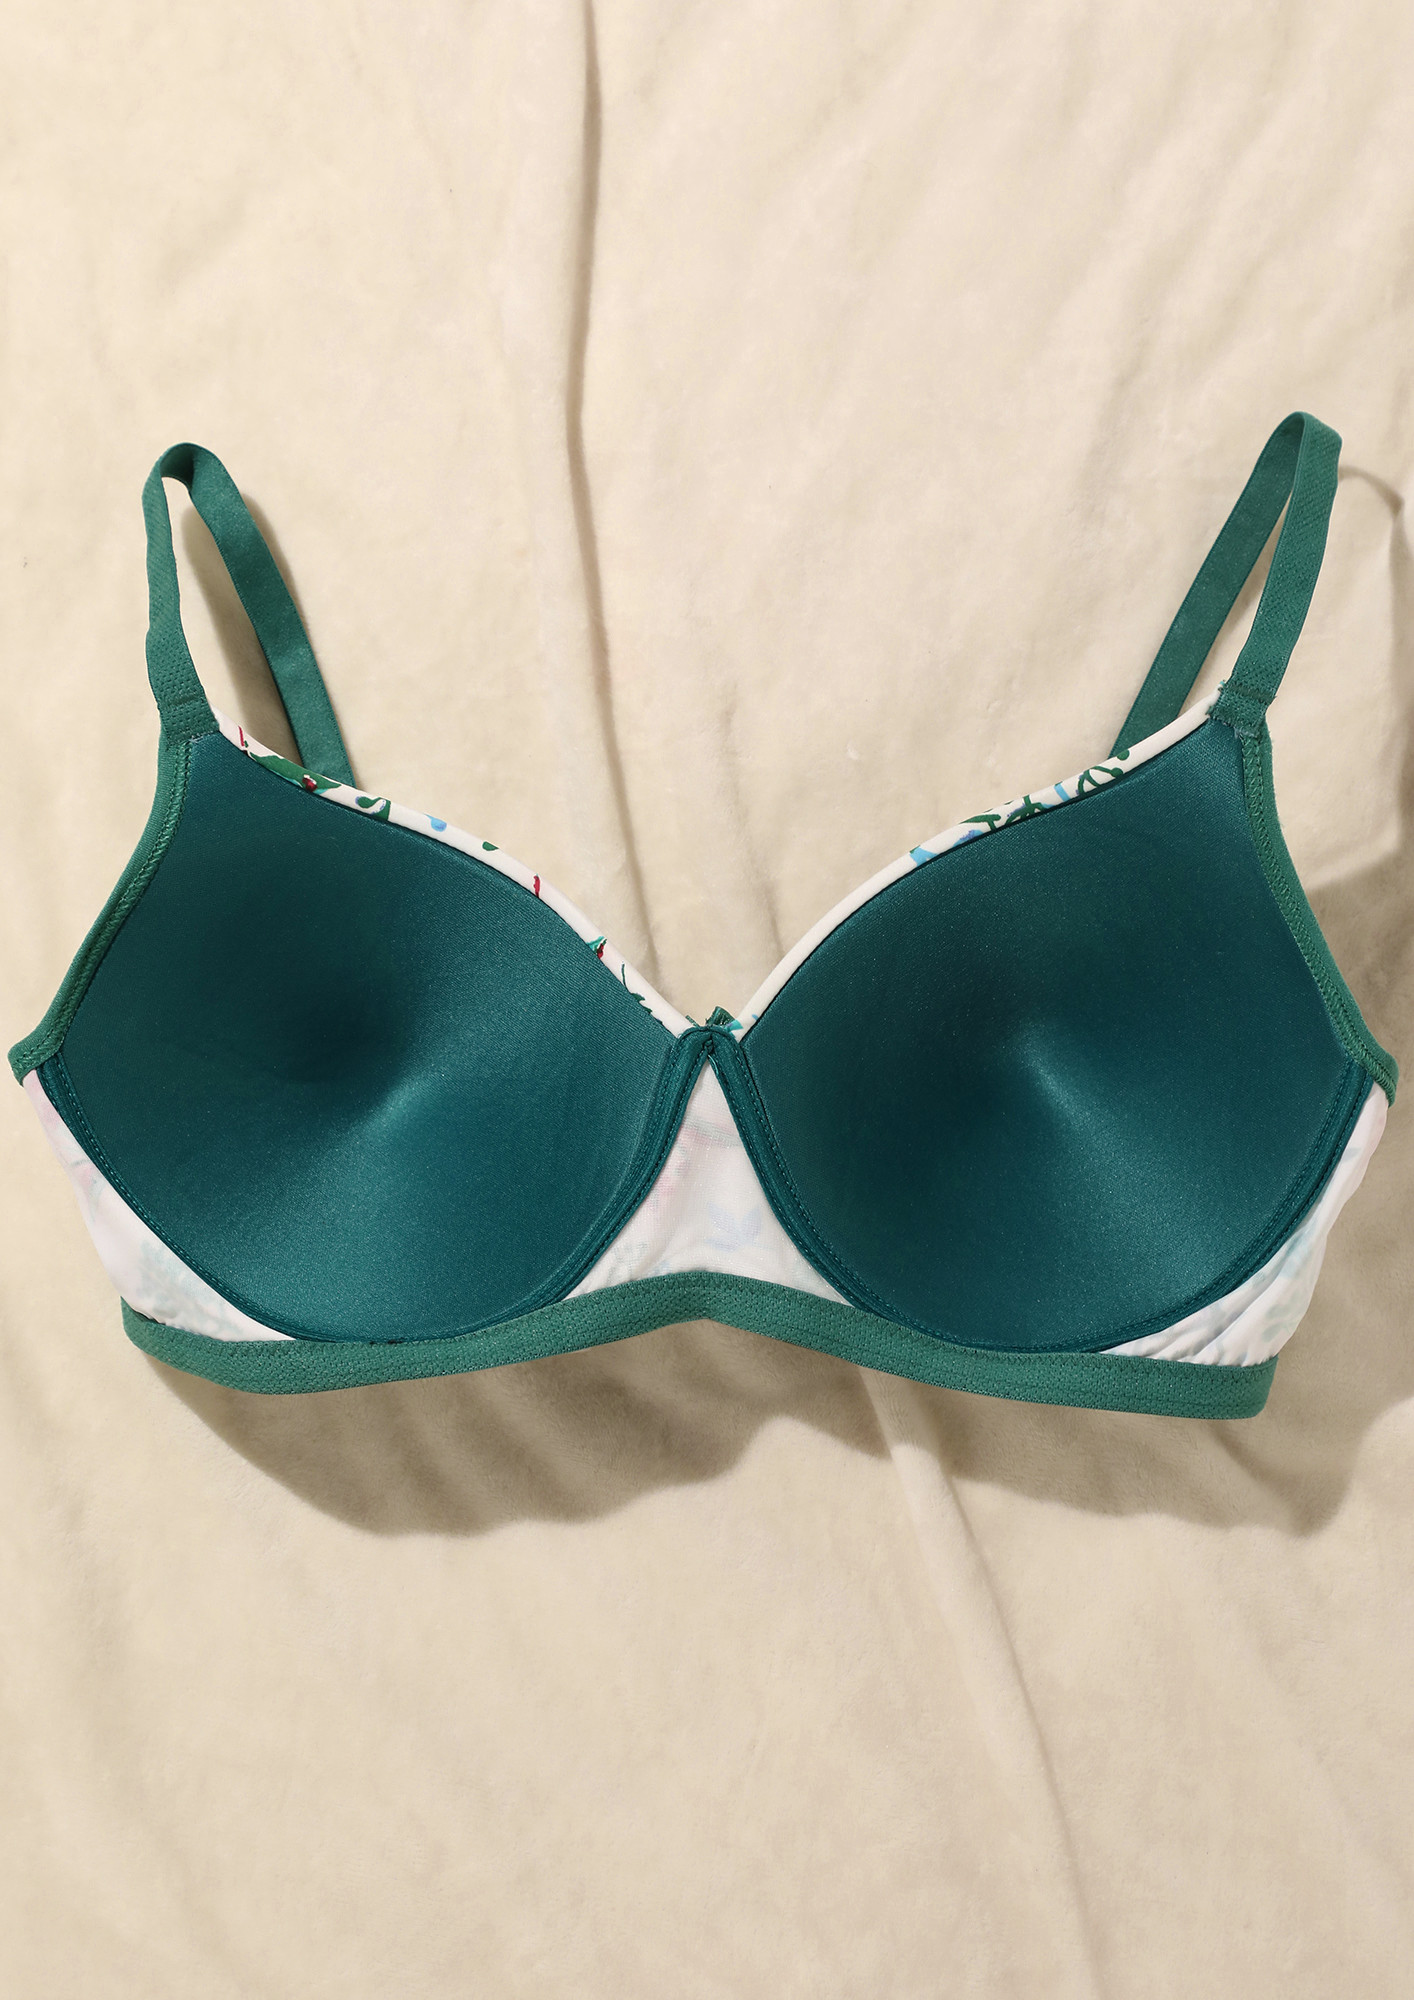 40C Kindly Bra Style 40002, Green Leaf Print, Smooth Lined Cups